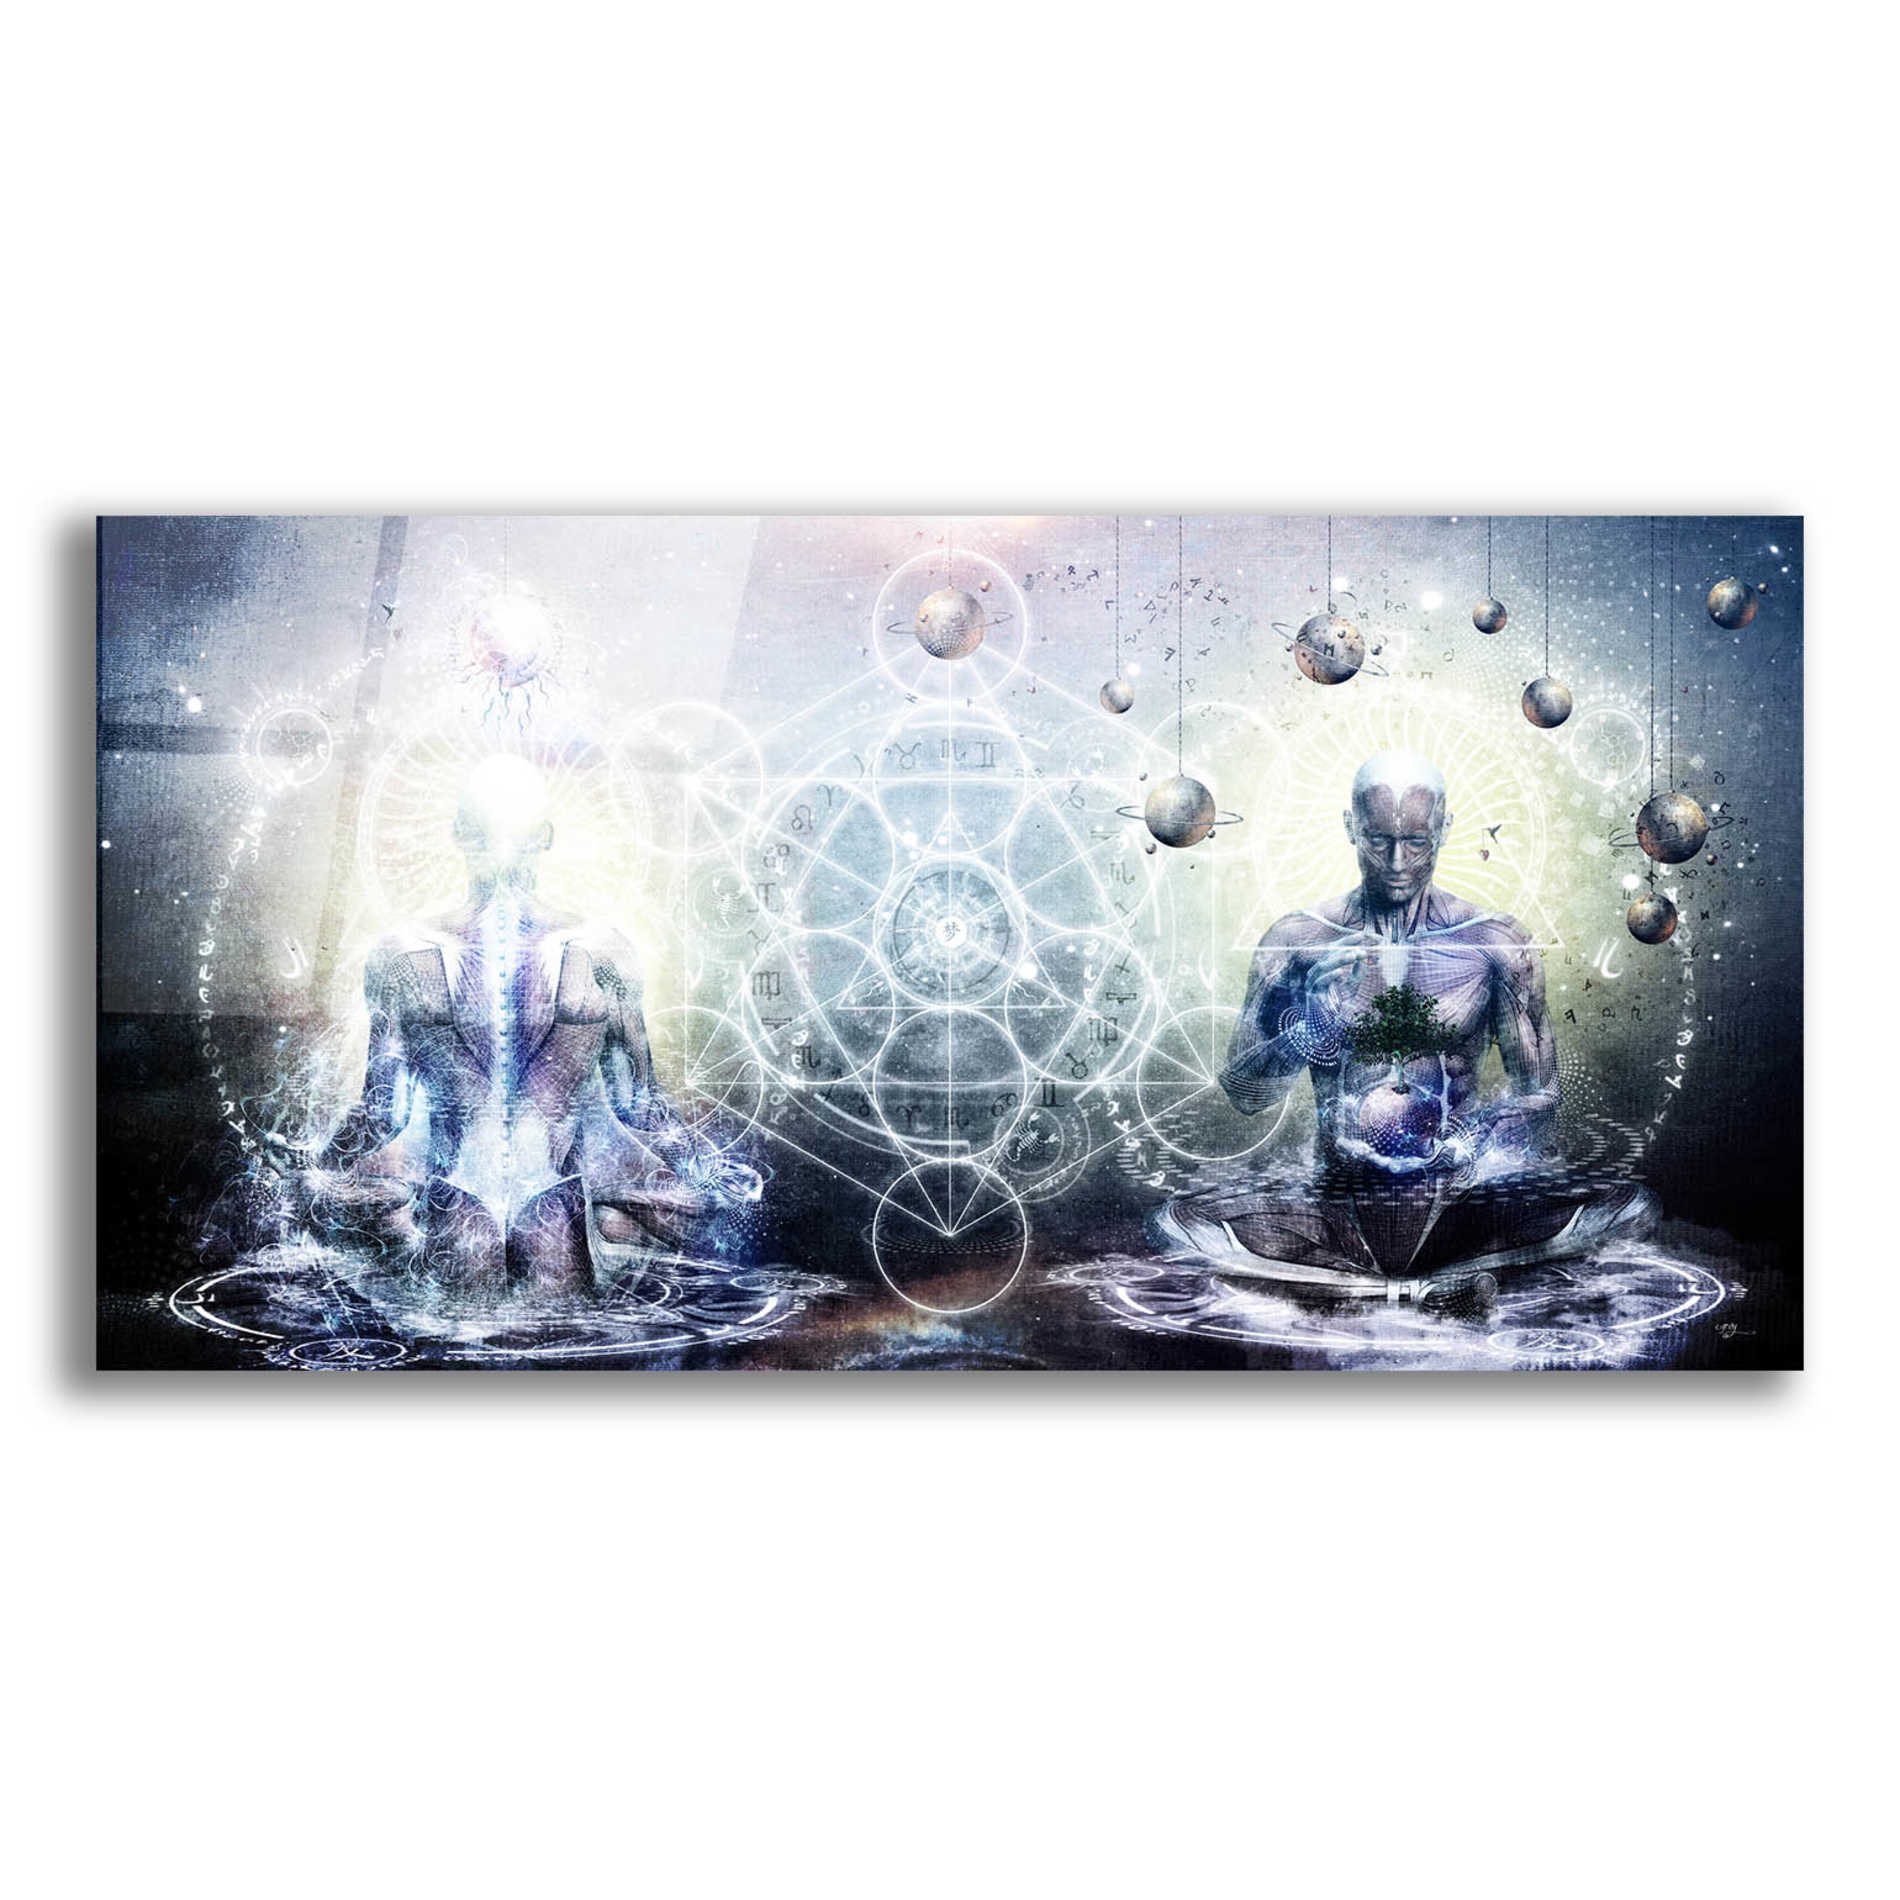 Epic Art 'Experience So Lucid, Discovery So Clear' by Cameron Gray, Acrylic Glass Wall Art